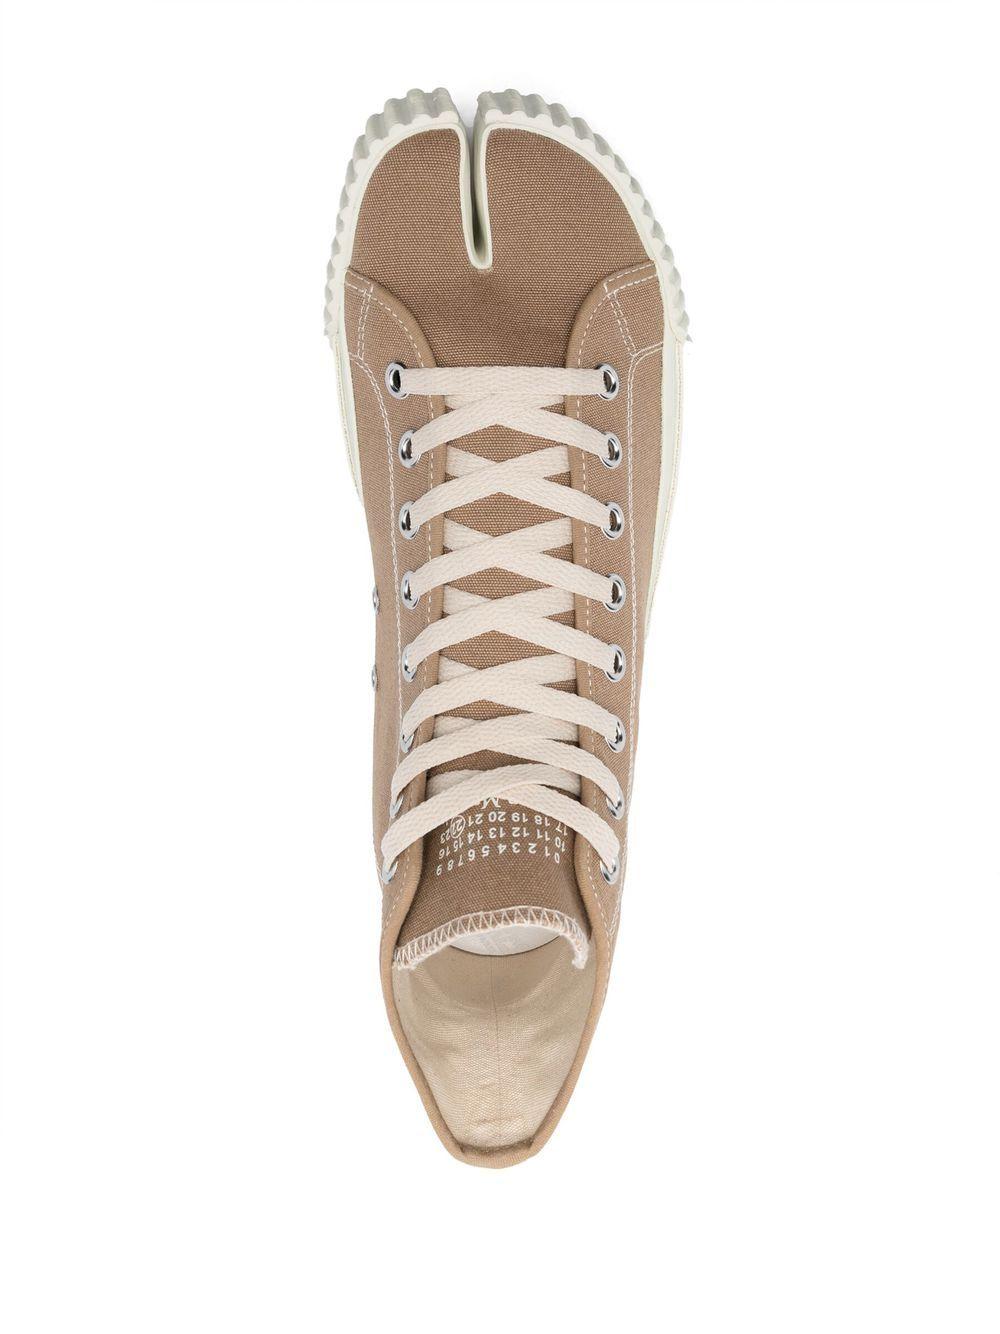 Maison Margiela Tabi High-top Sneakers in Natural for Men | Lyst